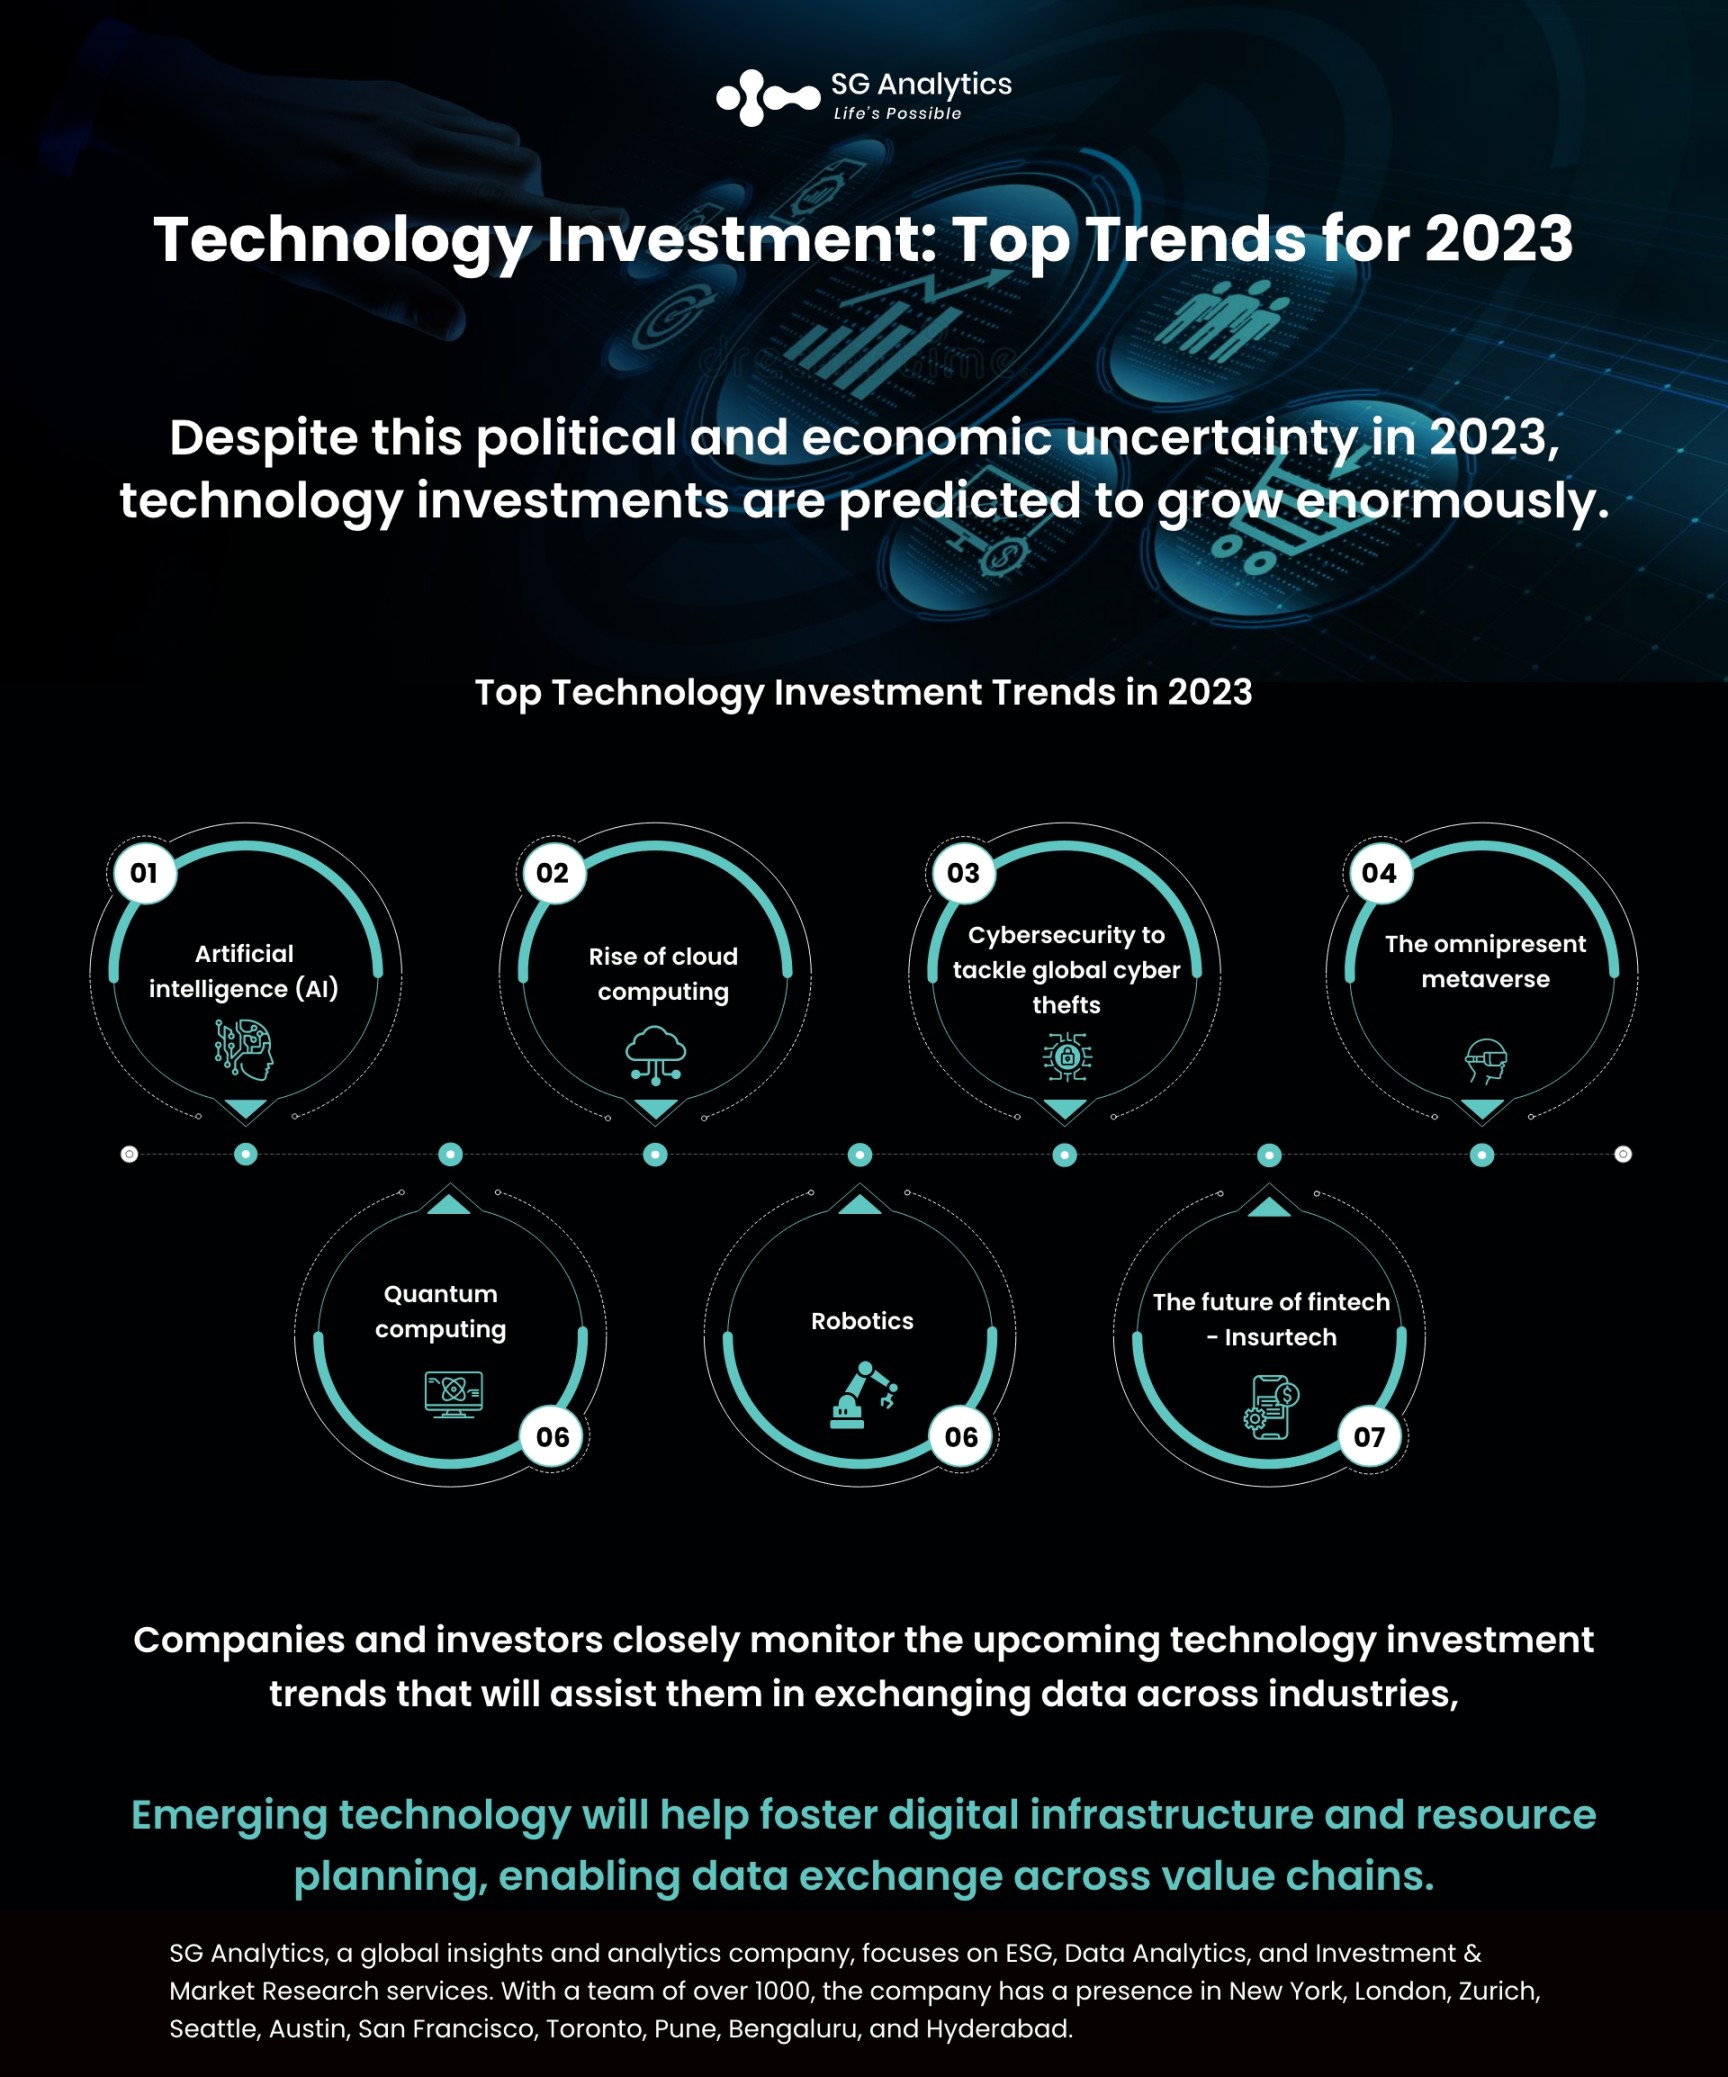 What are the Technology Investing Trends for